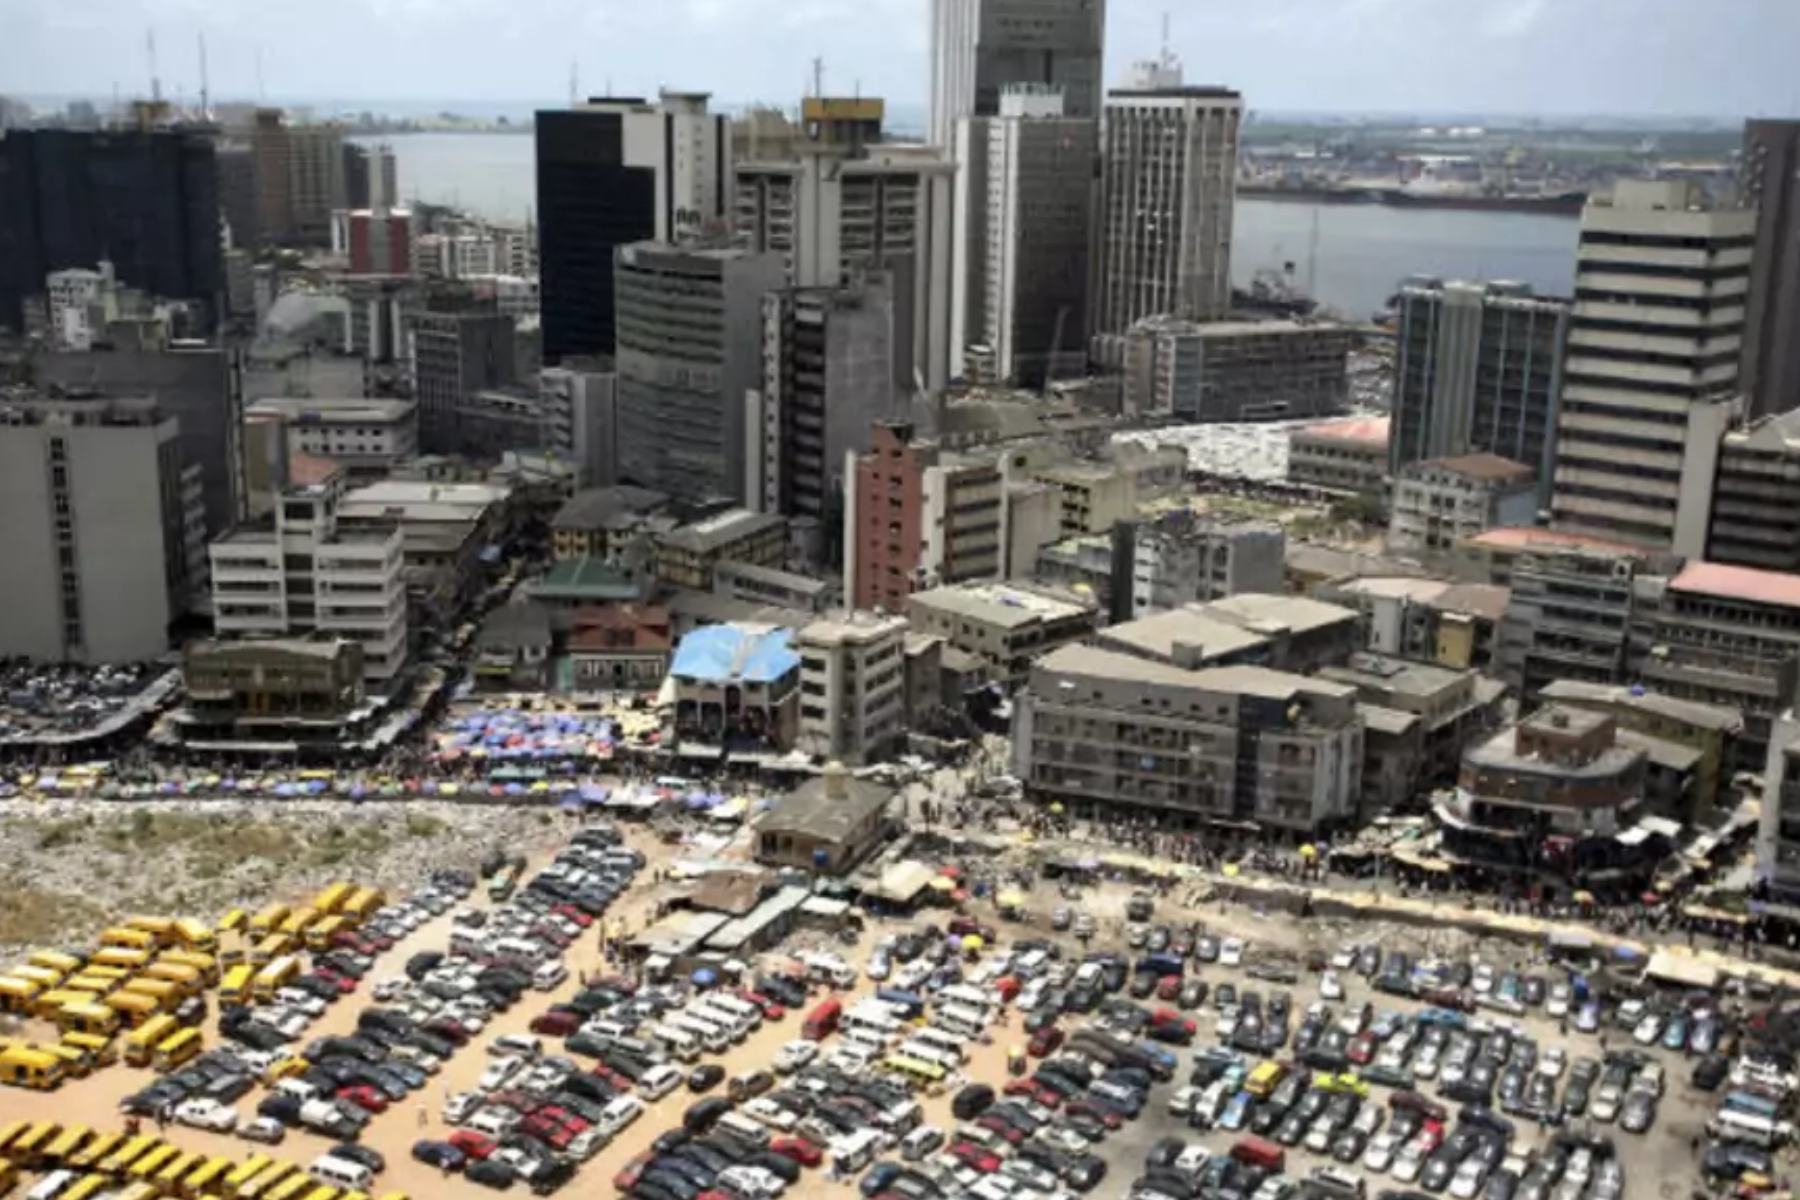 Buildings and cars in Lagos, Nigeria